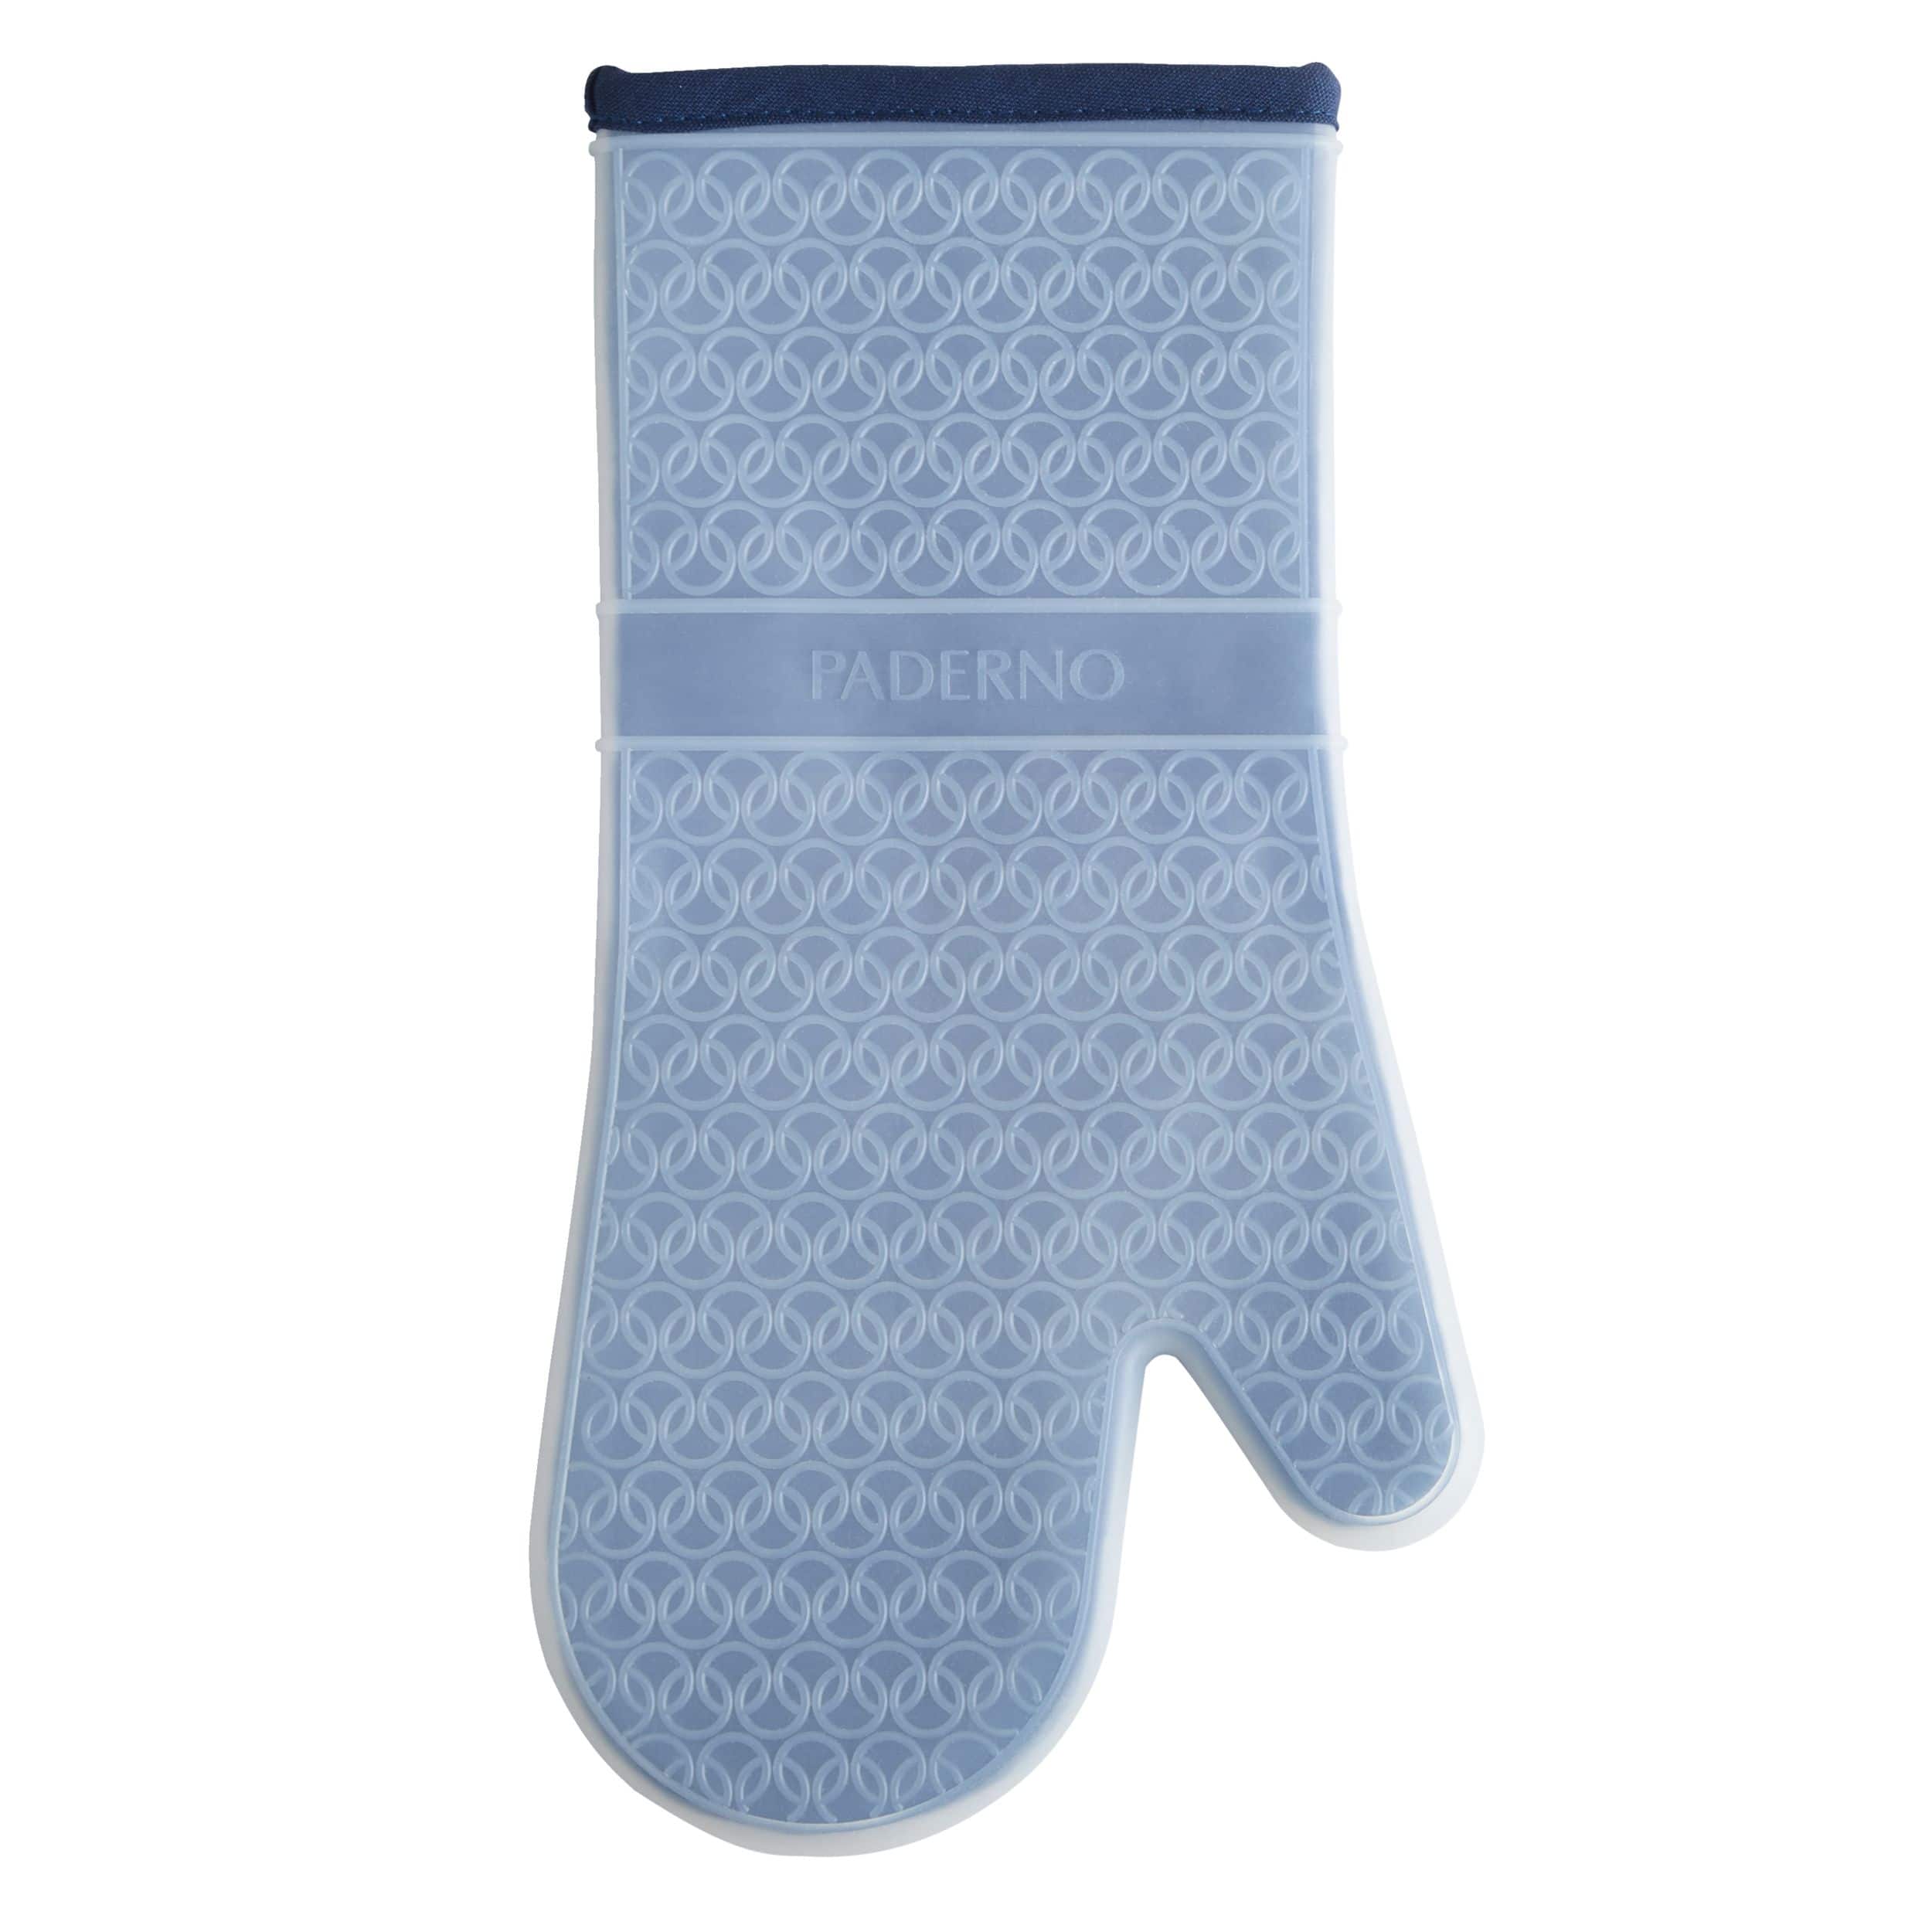 https://media-www.canadiantire.ca/product/living/kitchen/dining-and-entertaining/1422745/paderno-silicone-oven-mitt-navy-070463cb-d97a-4858-bcc8-43c04b69ee90-jpgrendition.jpg